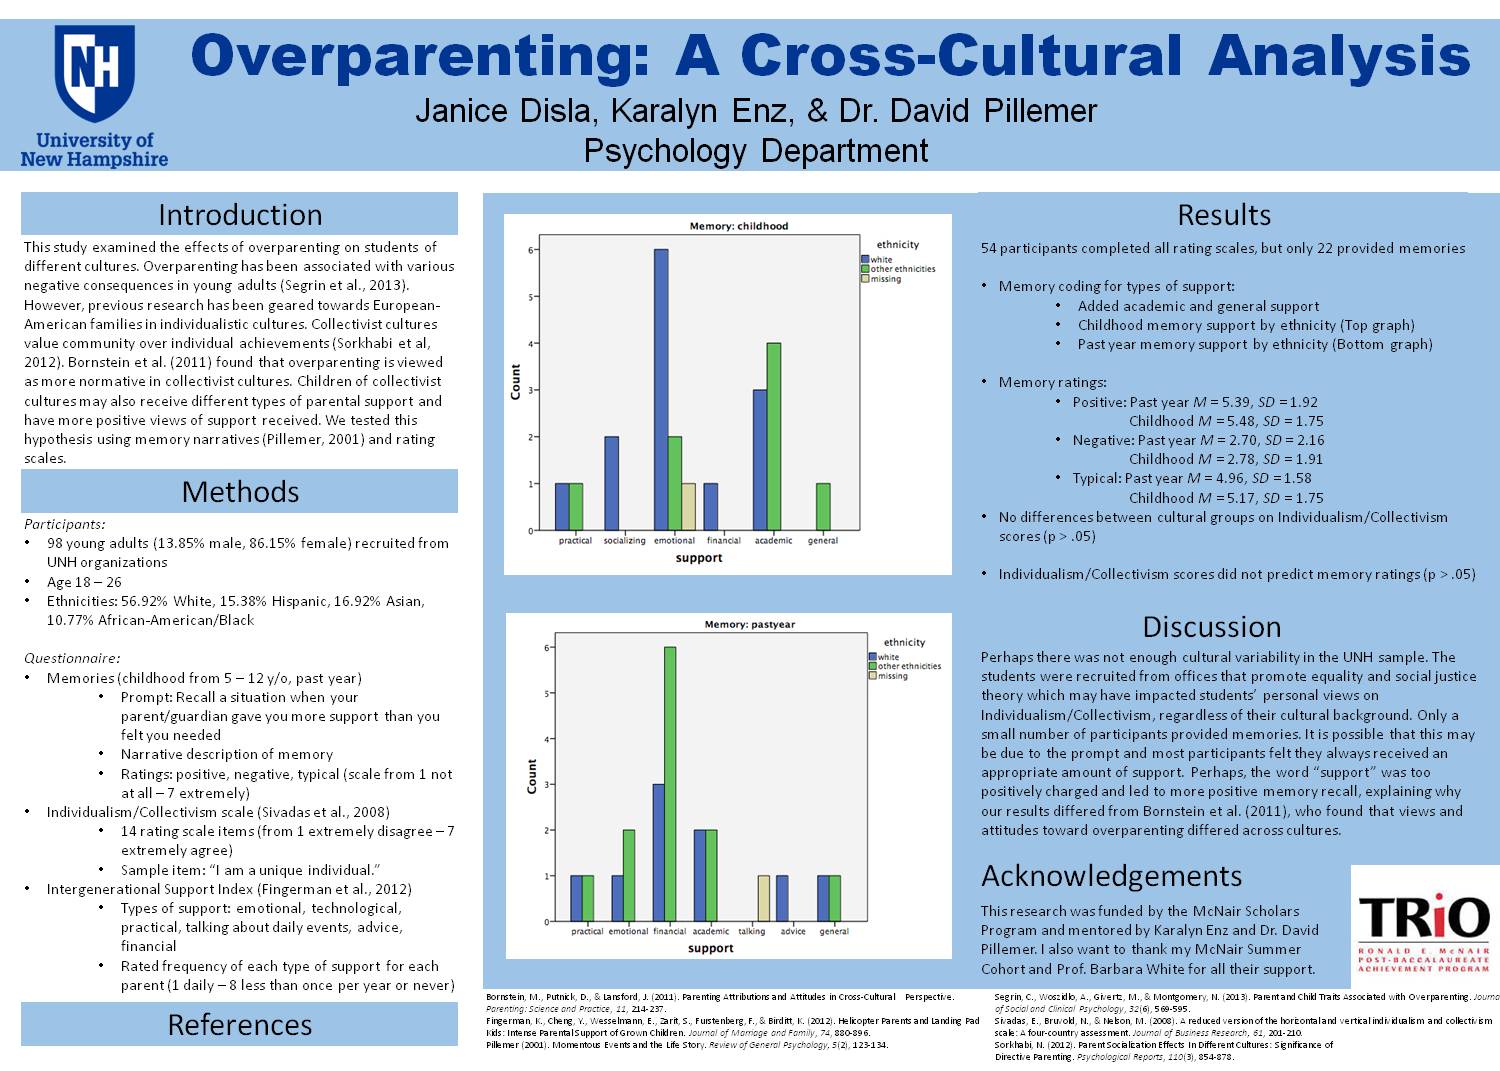 Overparenting: A Cross-Cultural Analysis by Jto67